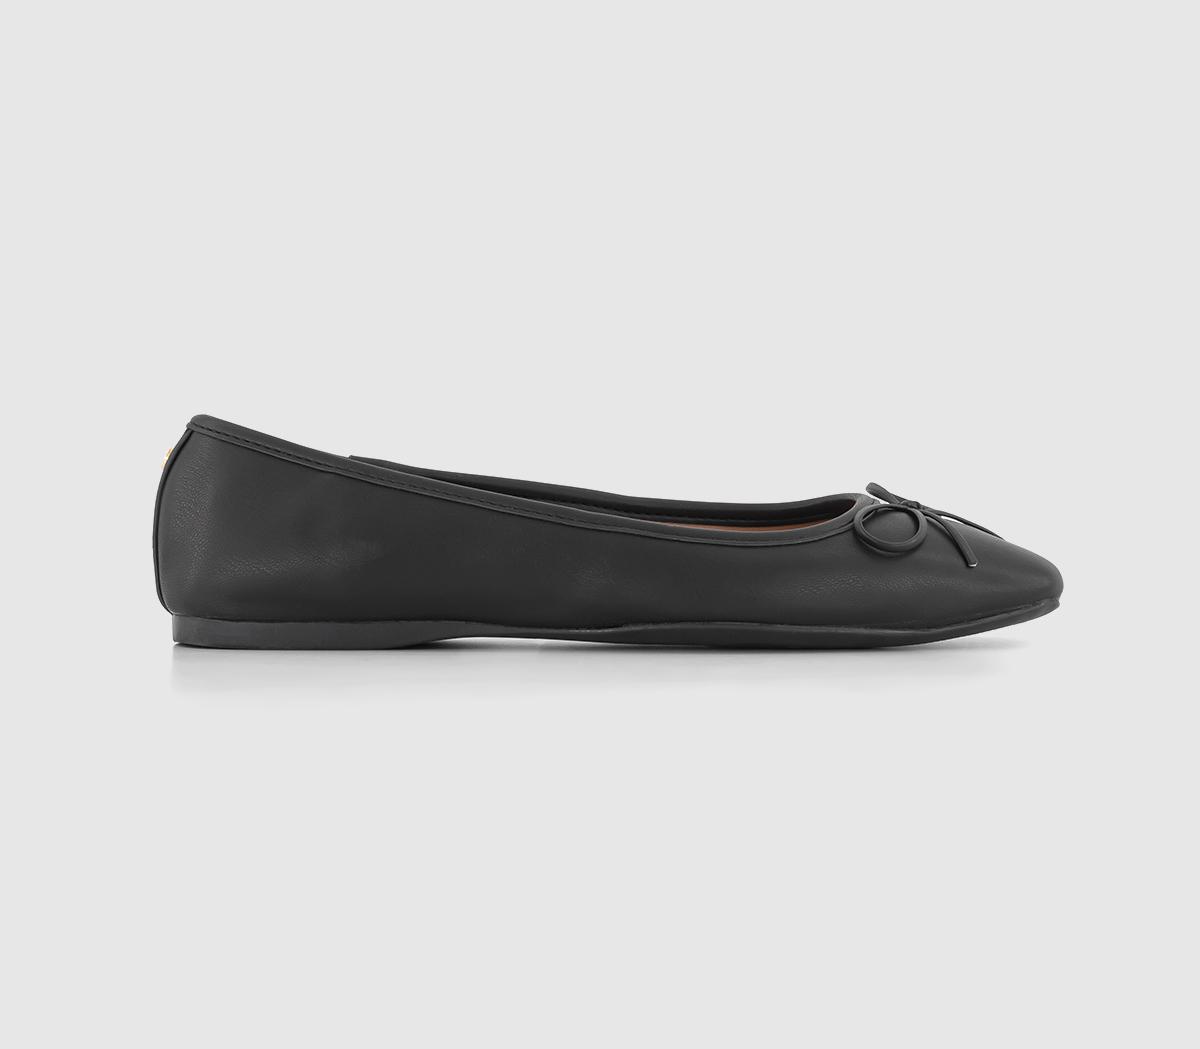 OFFICE Five Star Square Toe Ballerina Shoes Black - Flat Shoes for Women